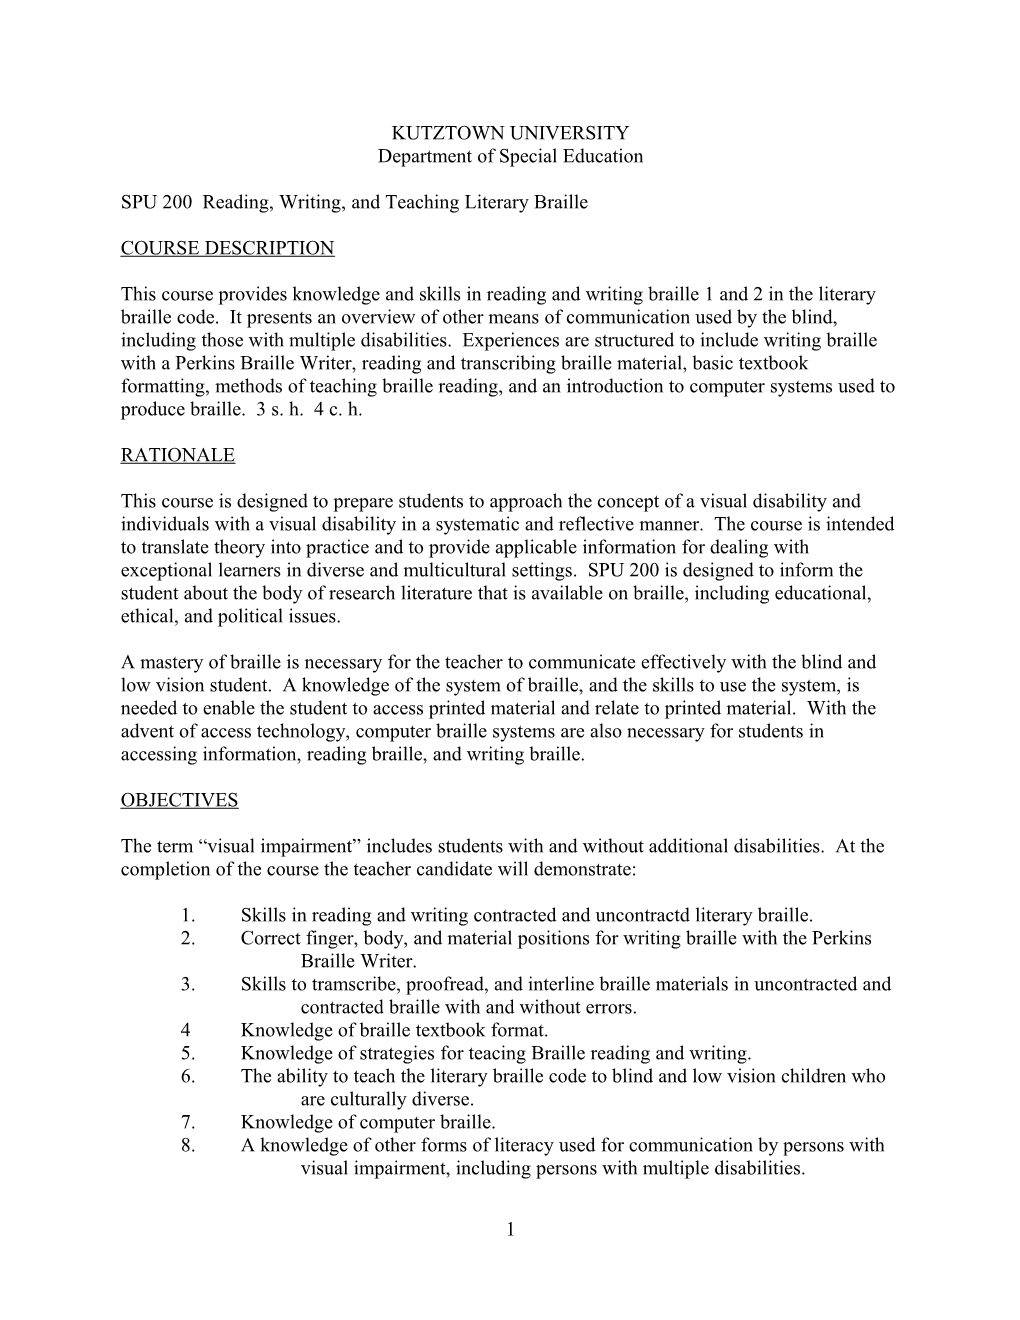 SPU 200 Reading, Writing, and Teaching Literary Braille